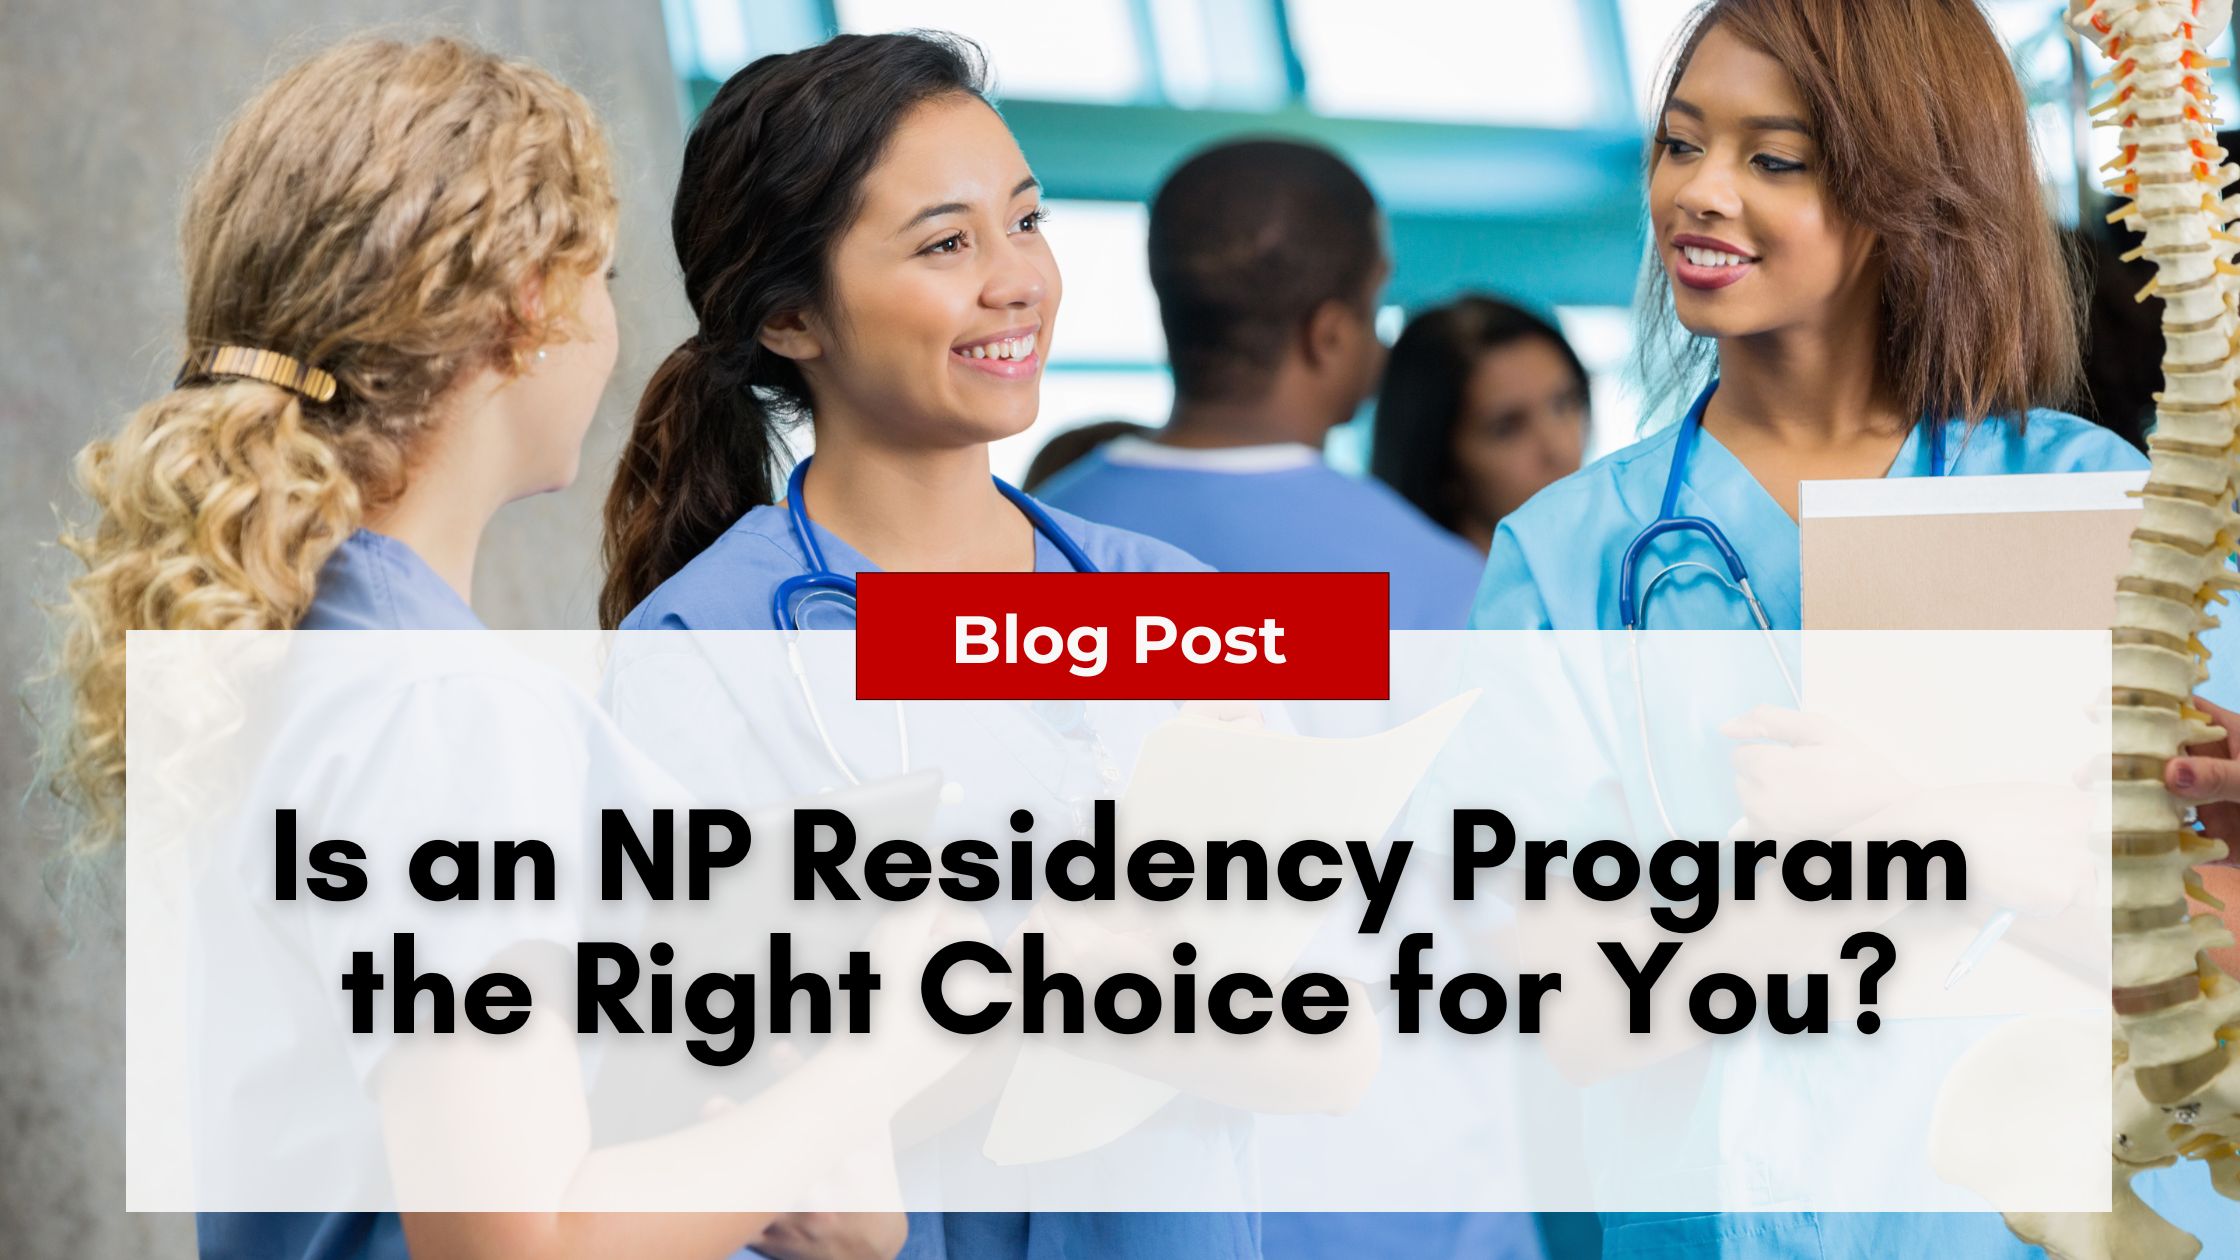 Three nurses in scrubs converse, holding medical documents. Overlay text reads: "Blog Post: Is an NP Residency Program the Right Choice for You?" An NP residency can be a crucial step to combat Nurse Practitioner burnout.